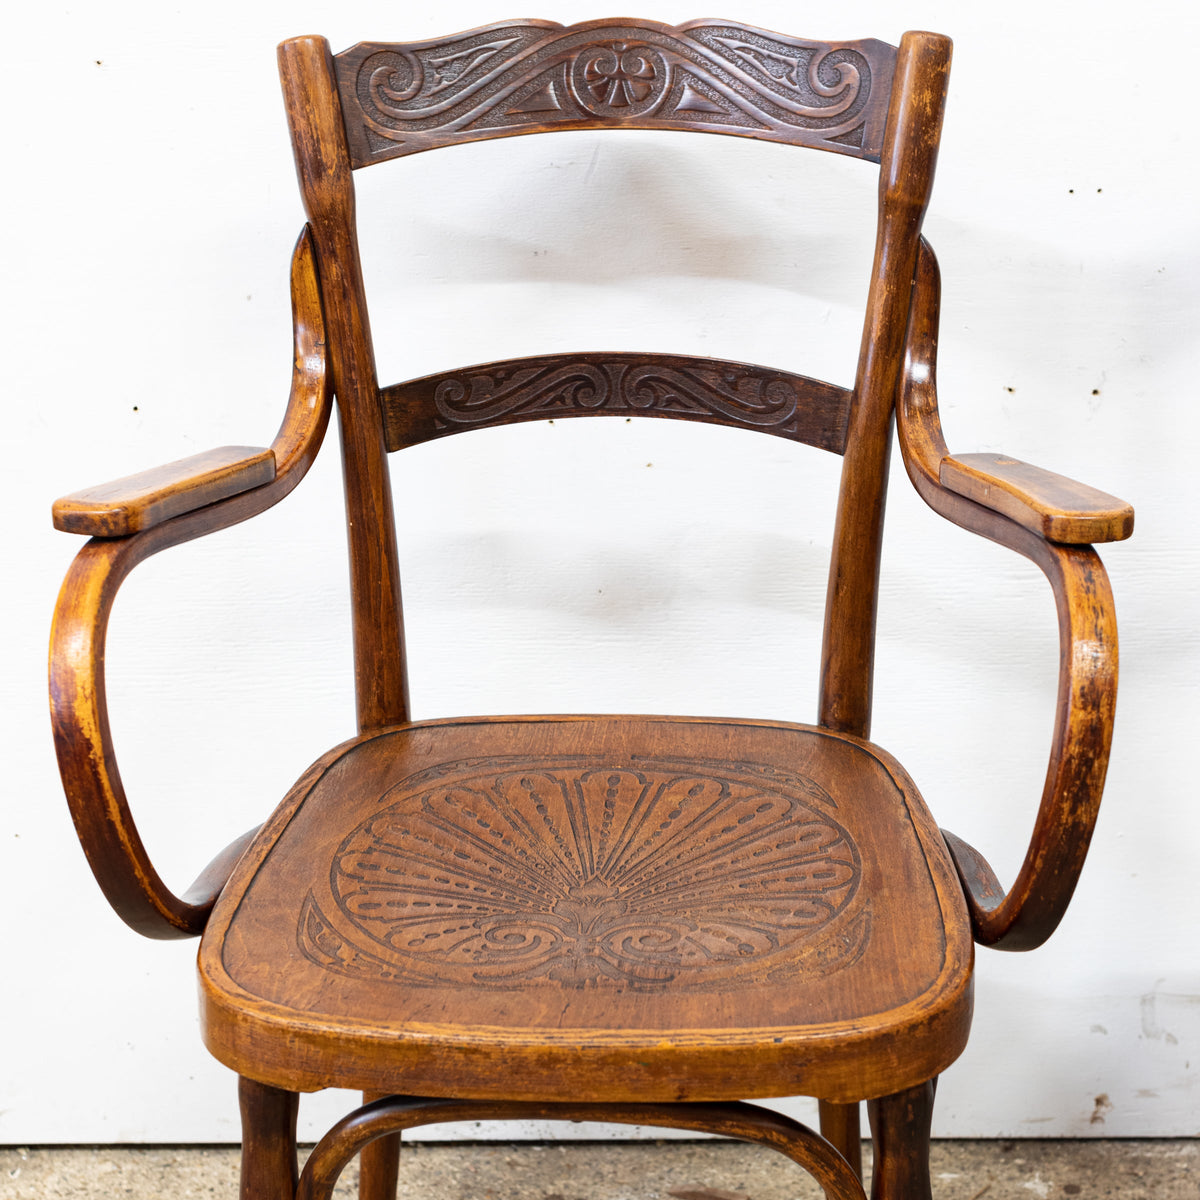 Antique Bentwood Beech Chairs | J&amp;J KOHN | The Architectural Forum